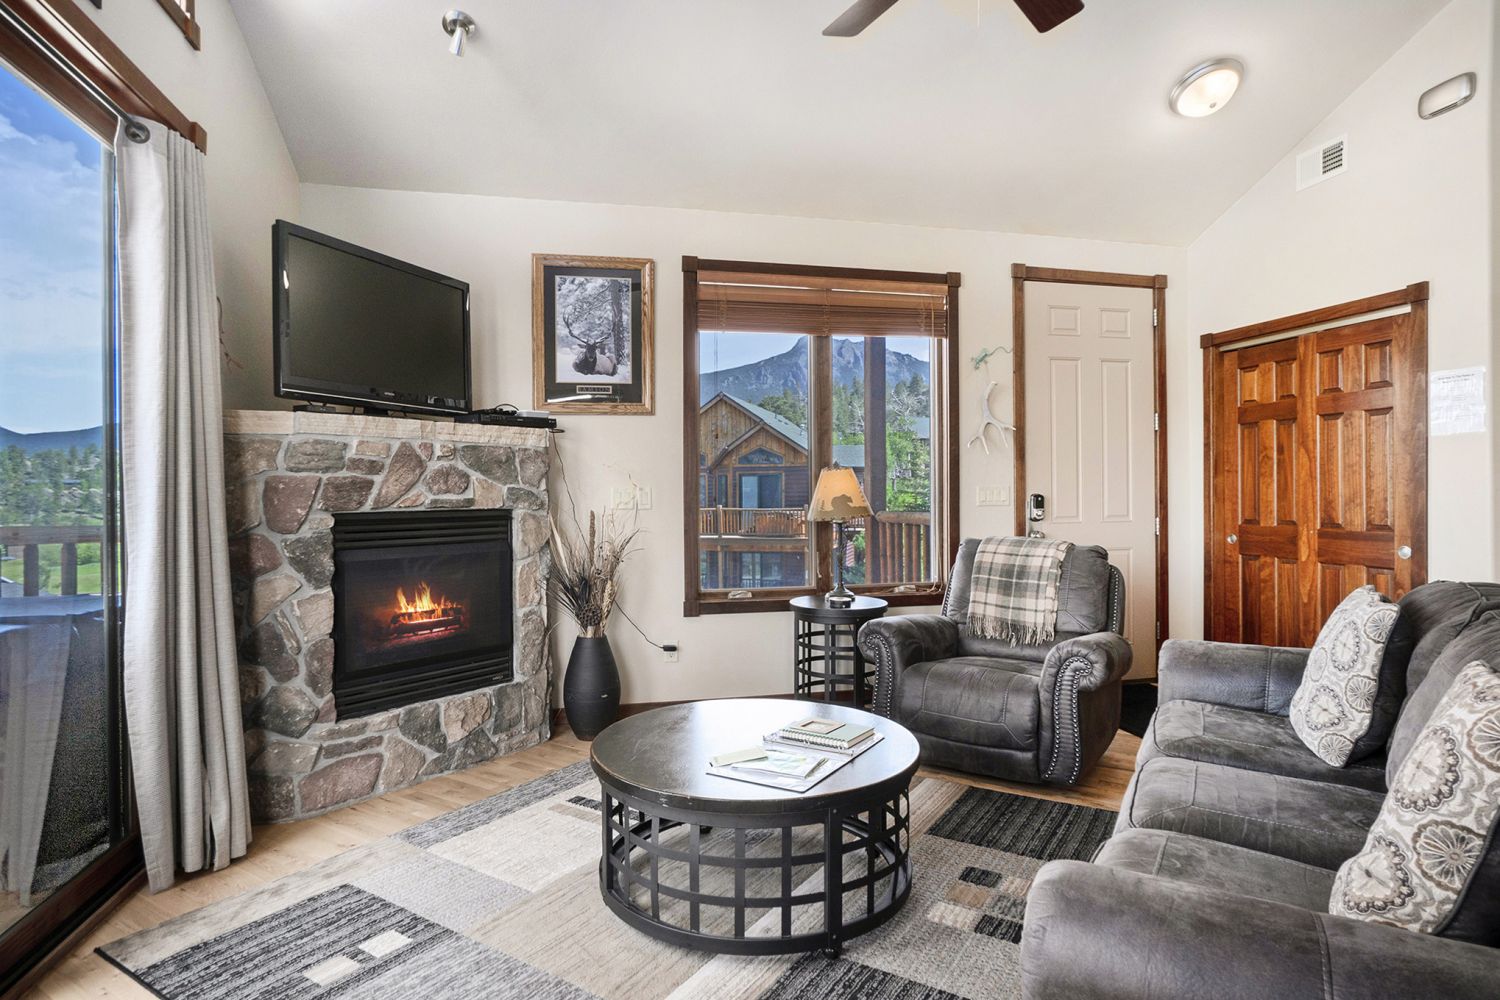 Gas Fireplace  - Enter into your gorgeous living room which includes sofa for 3, comfy side chair, gas fireplace and flat screen TV.